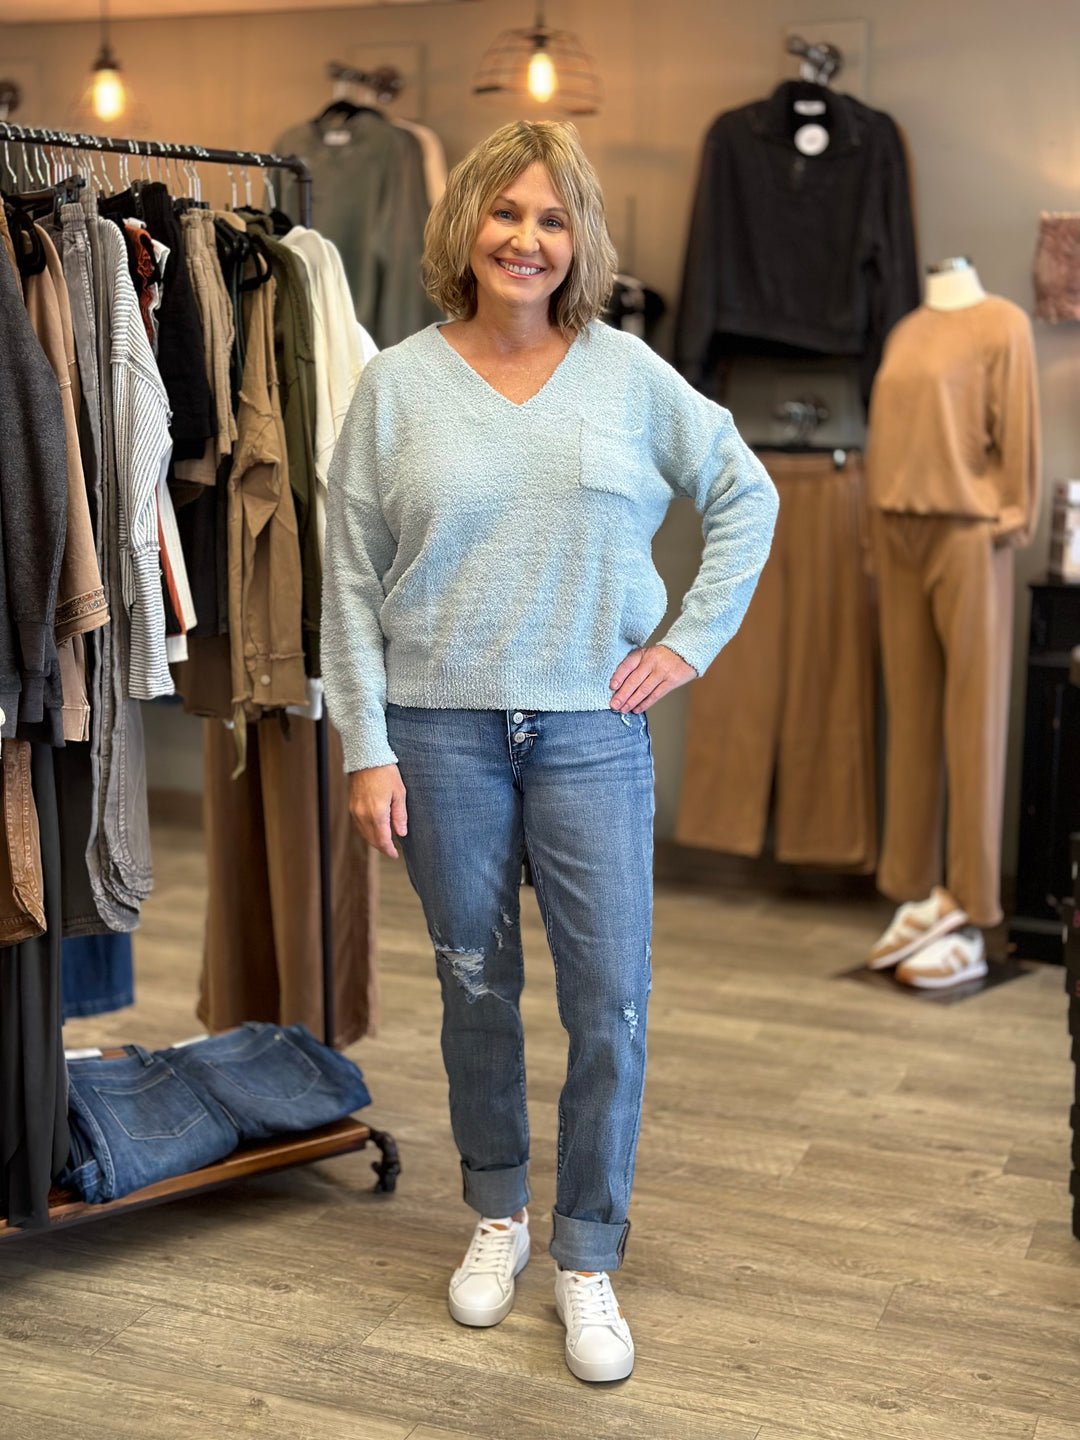 Posh West Boutique - It was a Judy Blue Jeans kinda day again